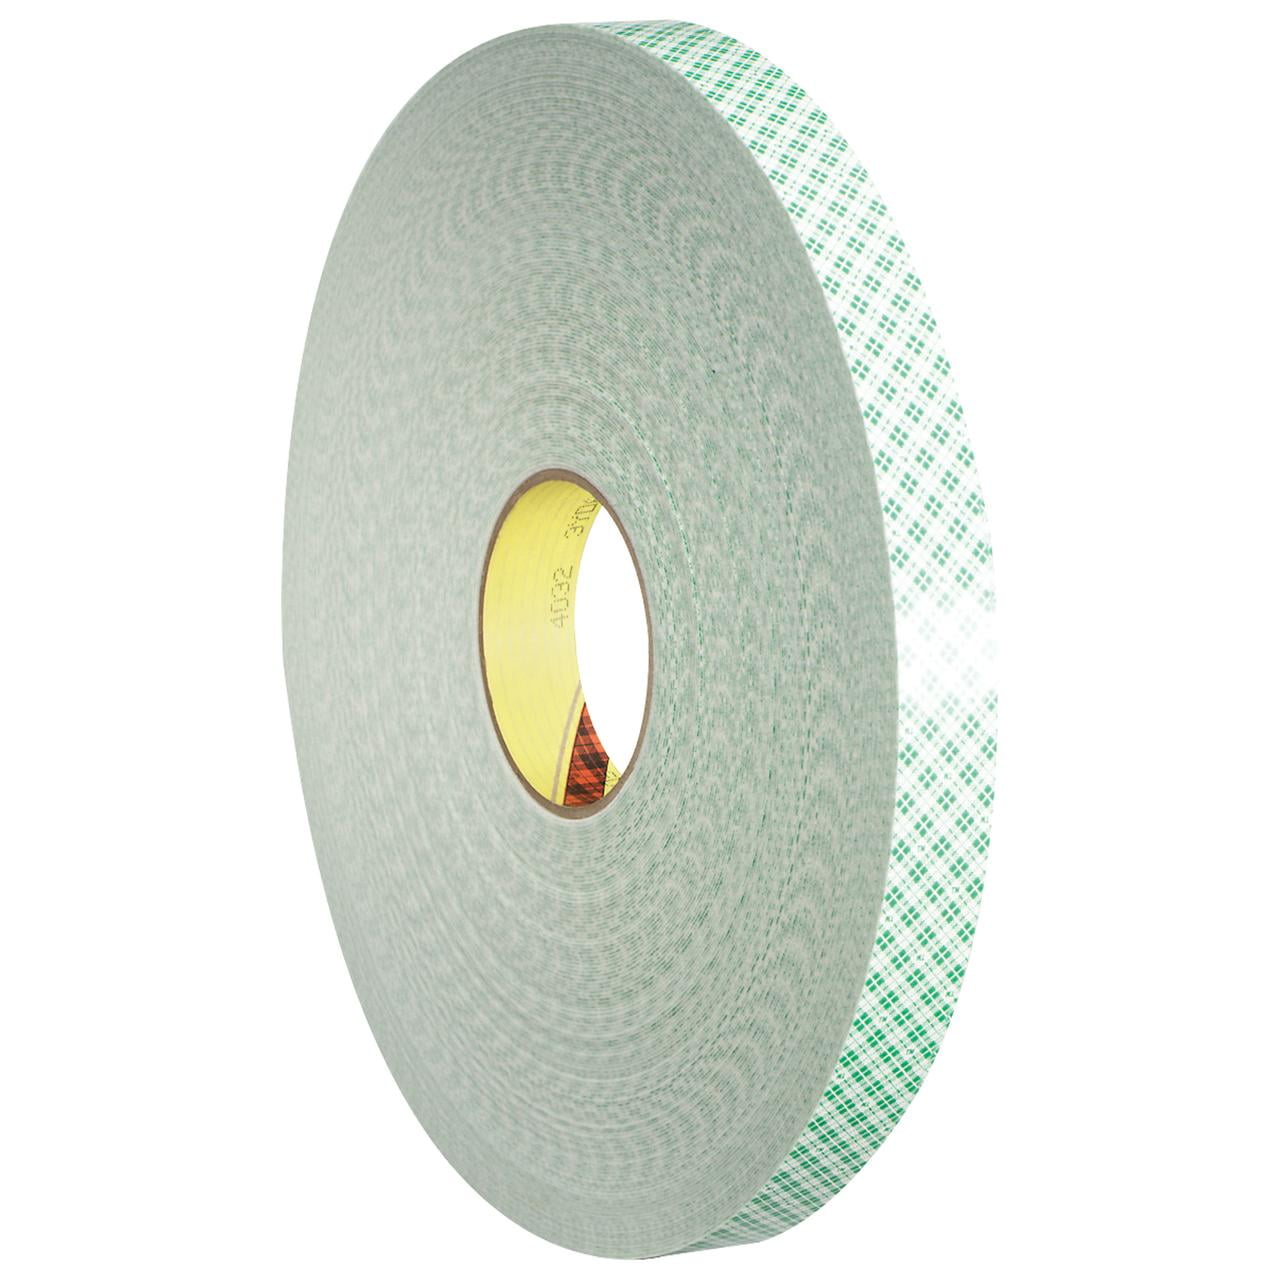 3/4 Thick x 2 Wide x 50 ft Rolls Polyether Urethane Foam Tape Box of 3 